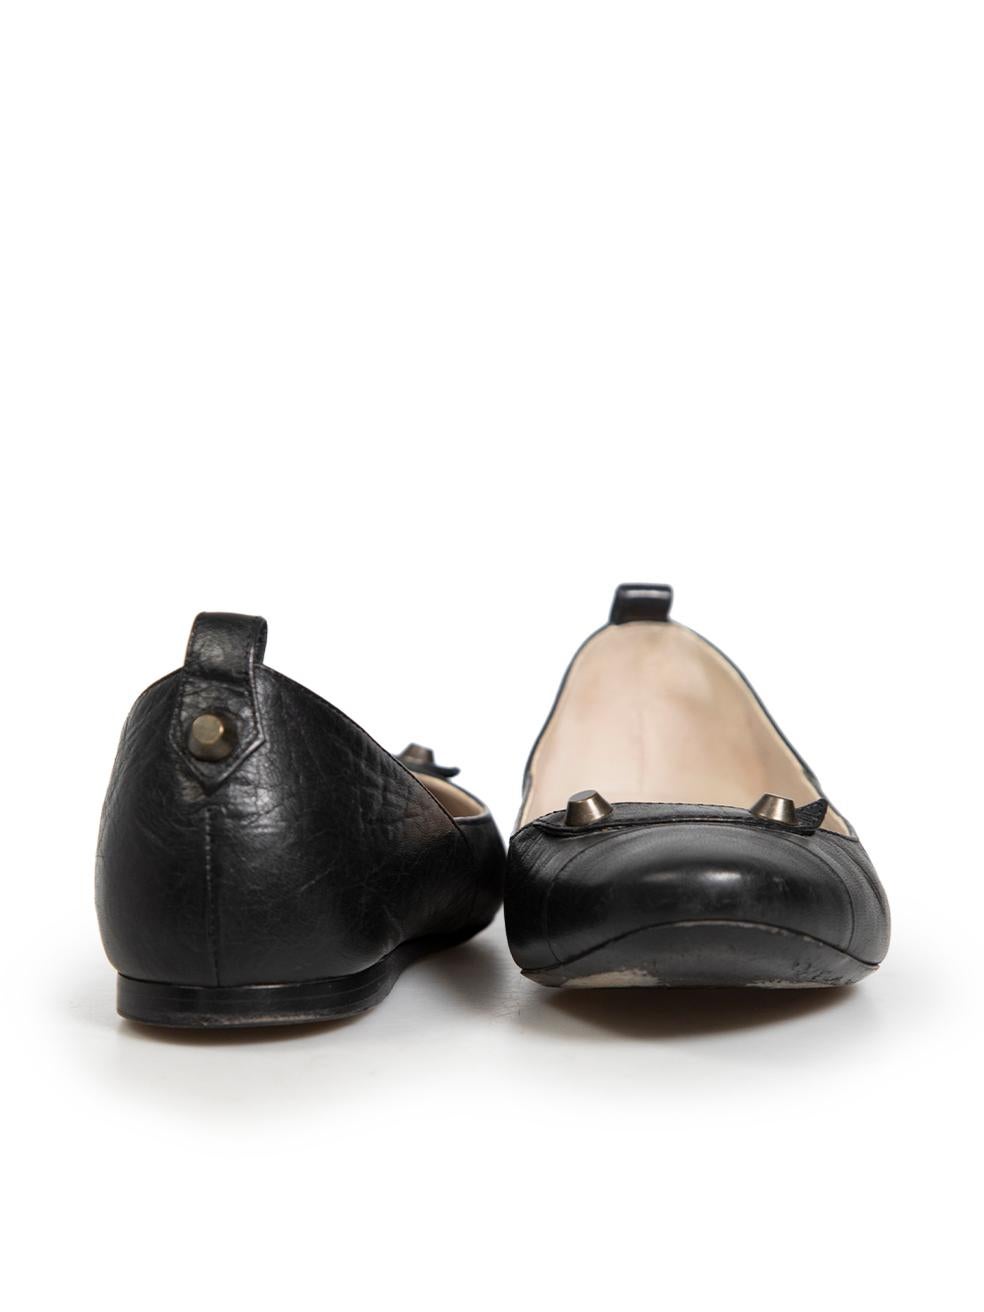 Balenciaga Black Leather Stud Detail Ballet Flats Size IT 39 In Good Condition For Sale In London, GB